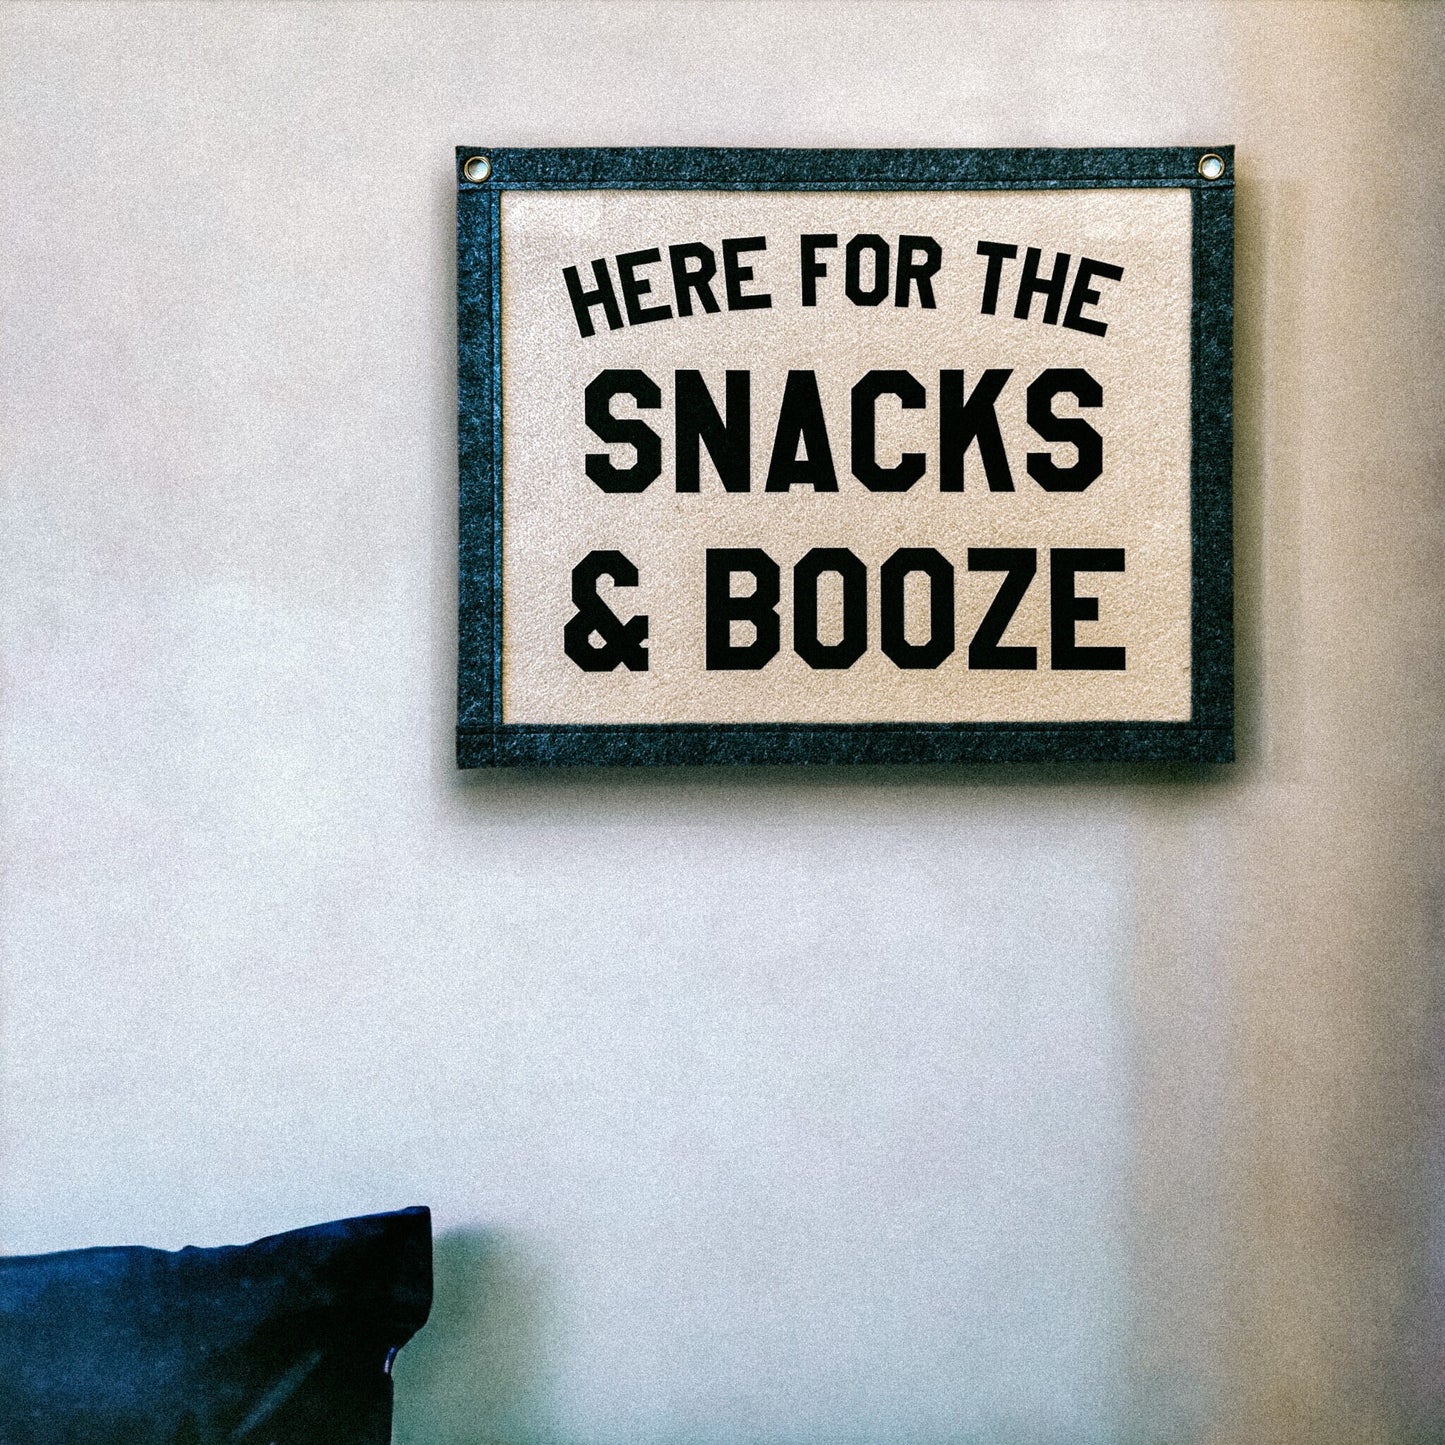 Here for the Snacks and booze Banner | Felt Pennant Flag Banner | Vintage Banner | Wall Decor | Wall Hanging